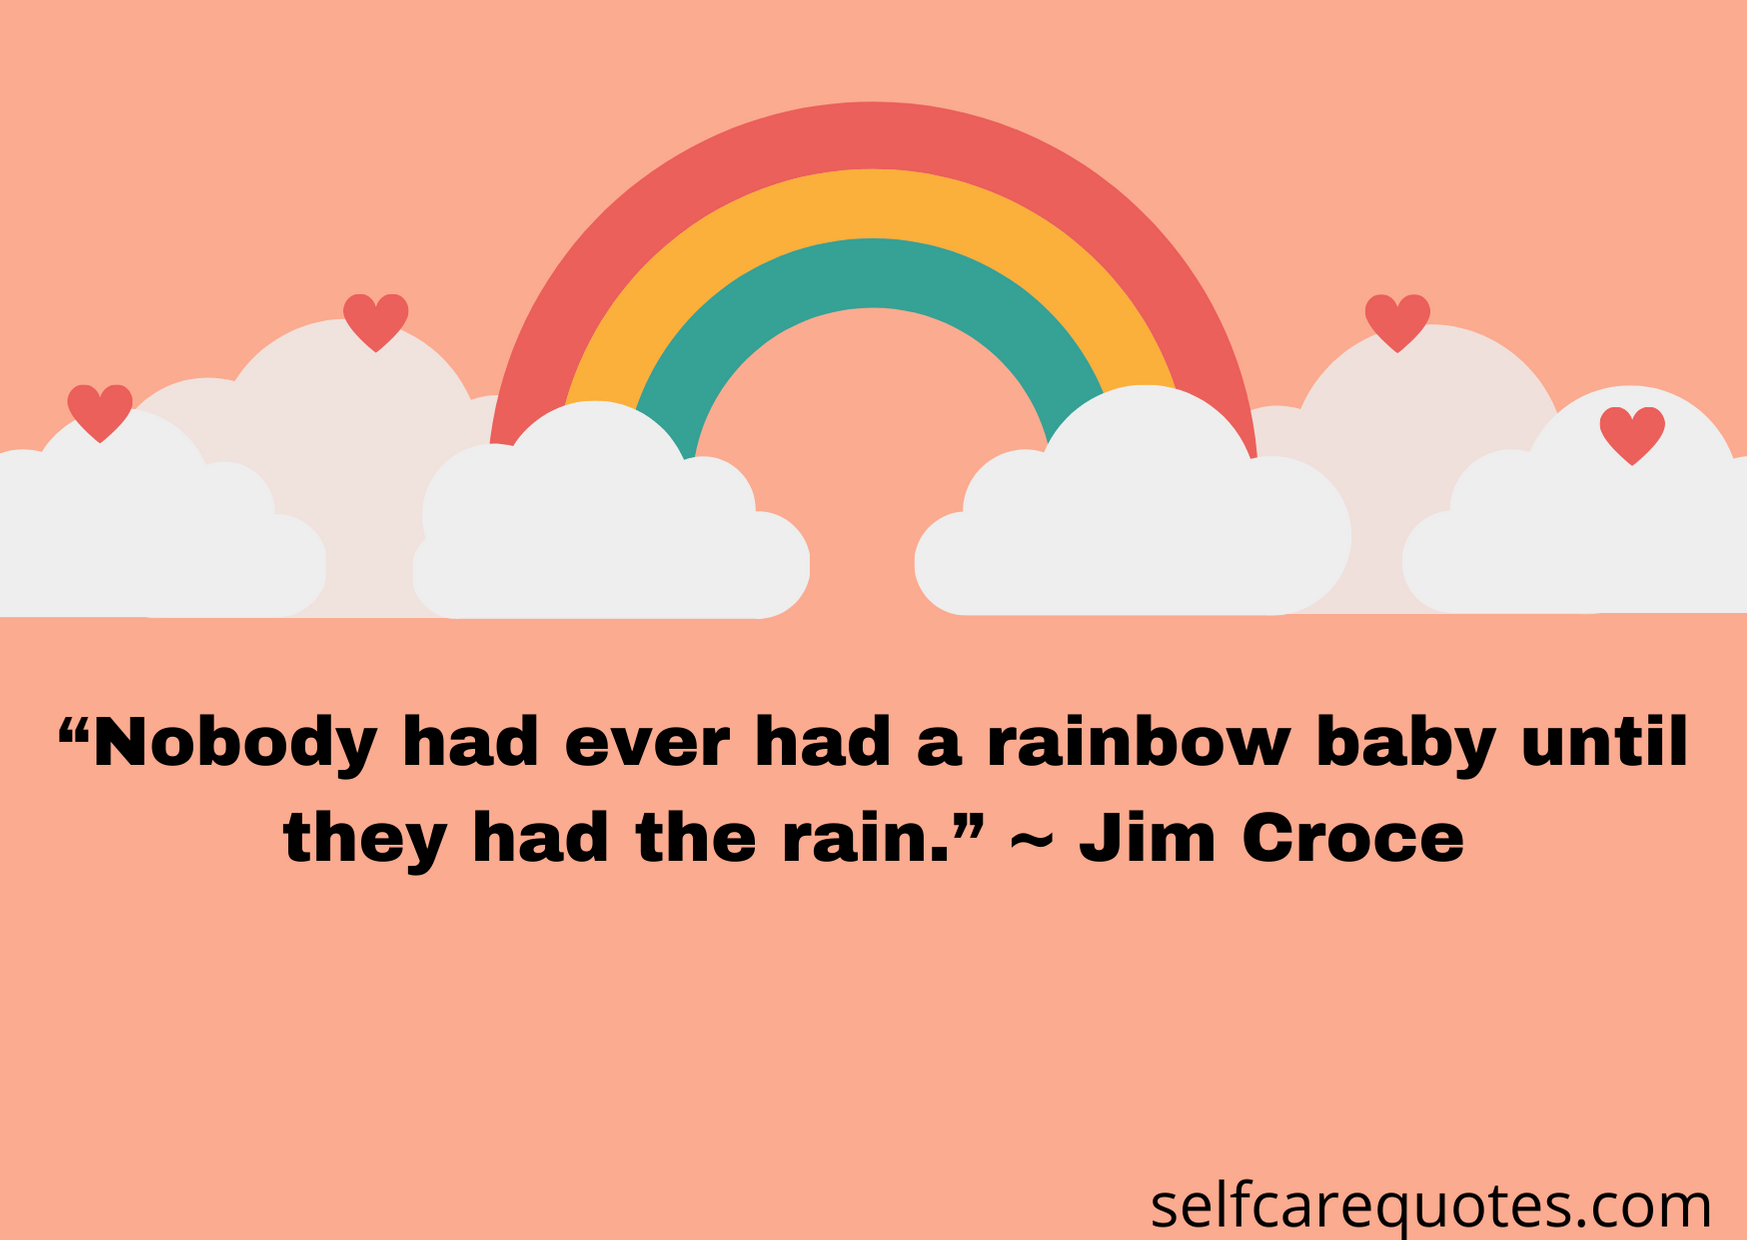 Quotes about rainbow babies